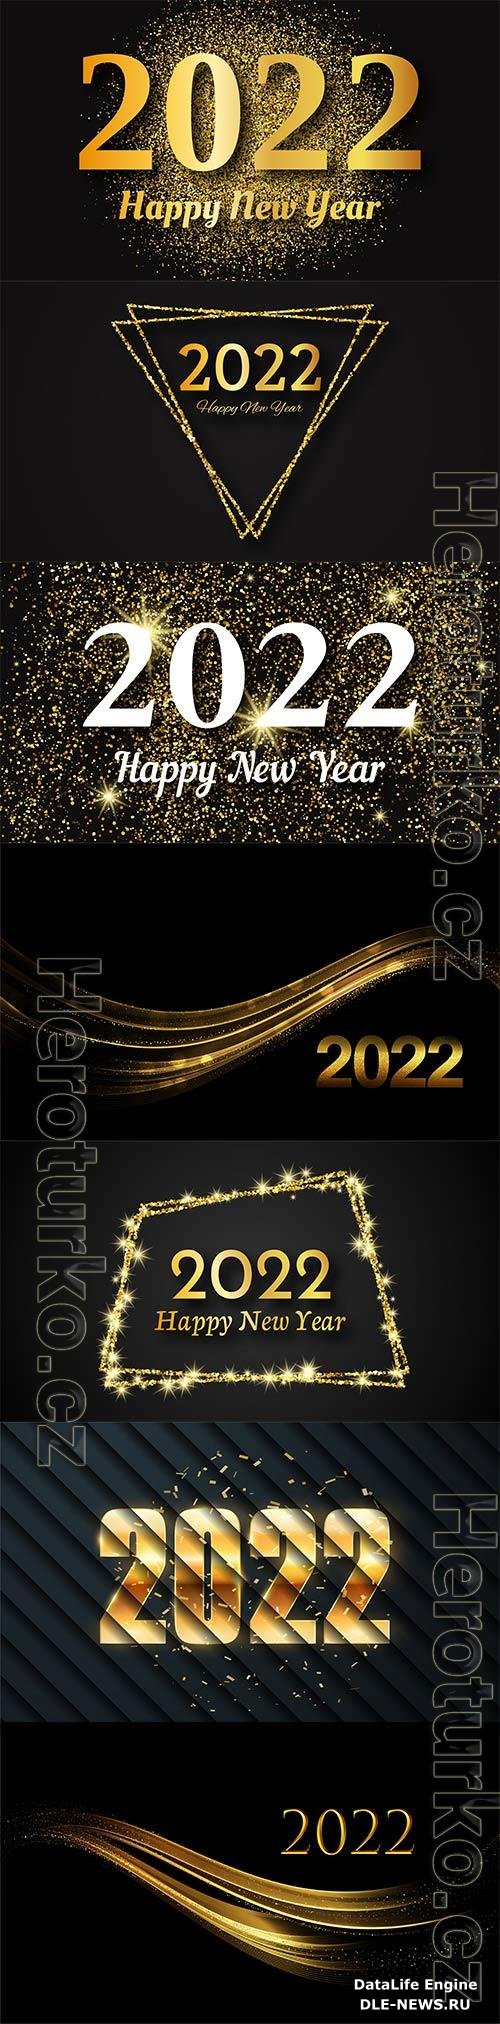 2022 happy new year vector background, gold inscription in a gold glitter